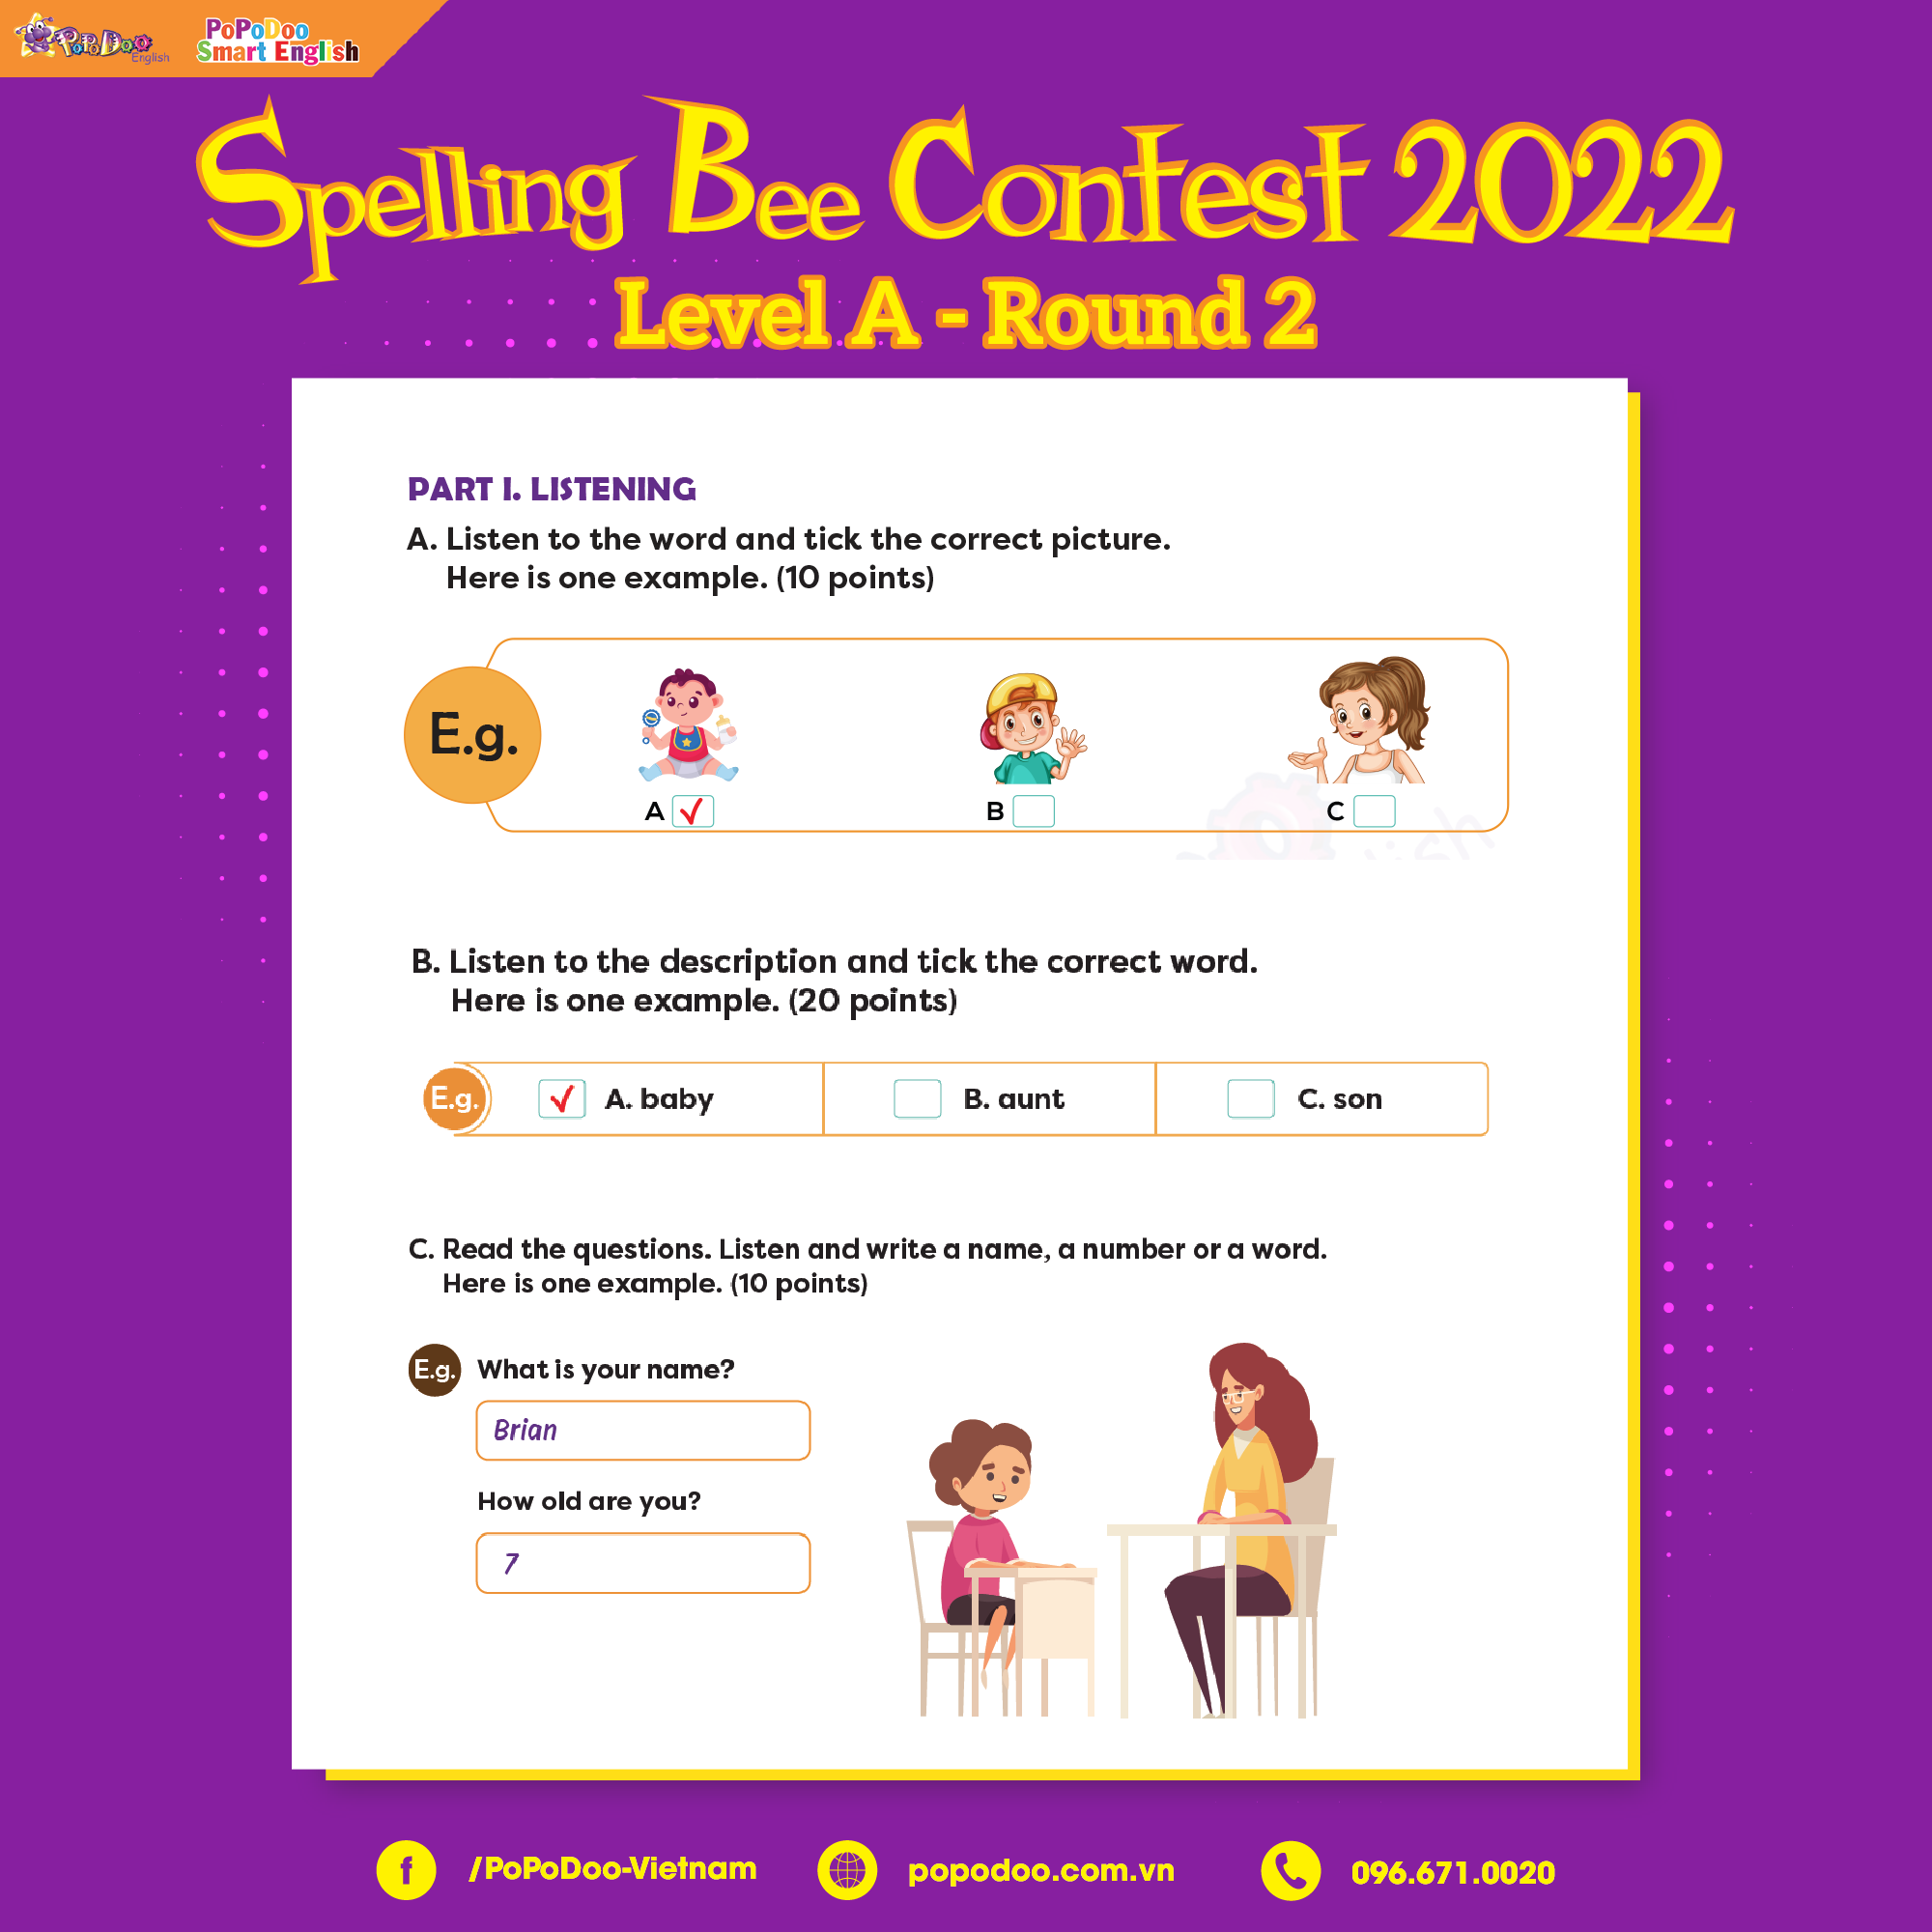 DẠNG ĐỀ THI POPODOO SPELLING BEE CONTEST 2022 - ROUND 2